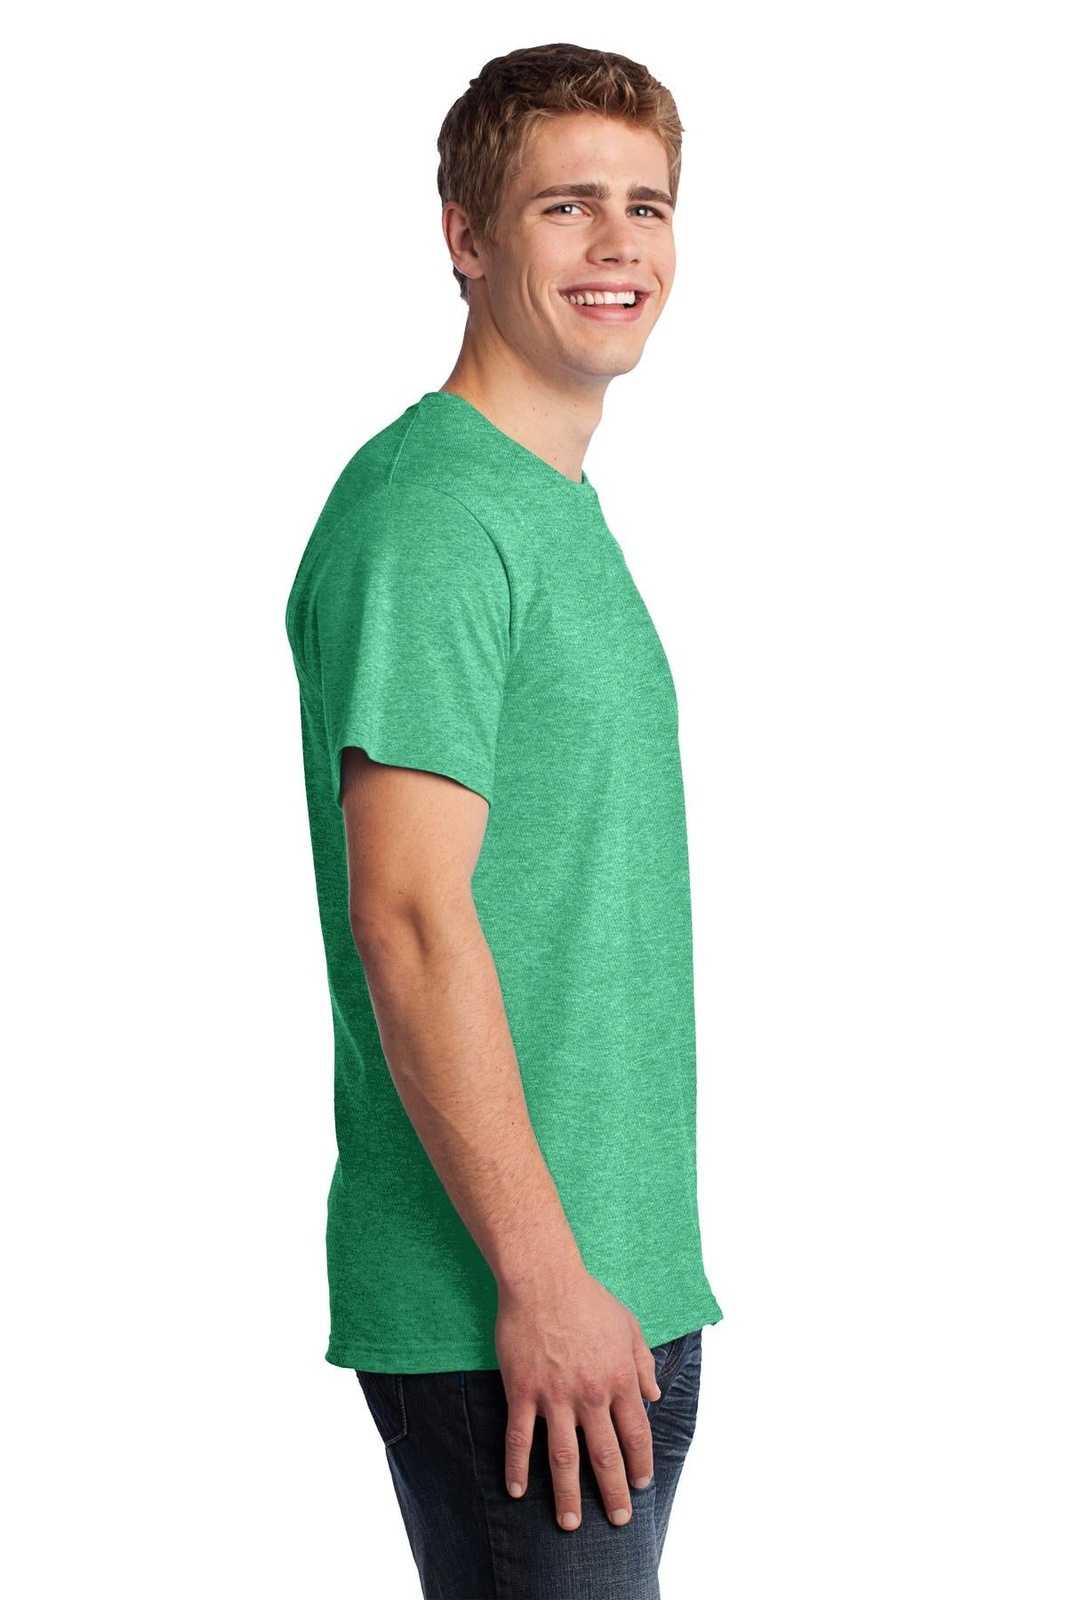 Fruit of the Loom 3930 HD Cotton 100% Cotton T-Shirt - Retro Heather Green - HIT a Double